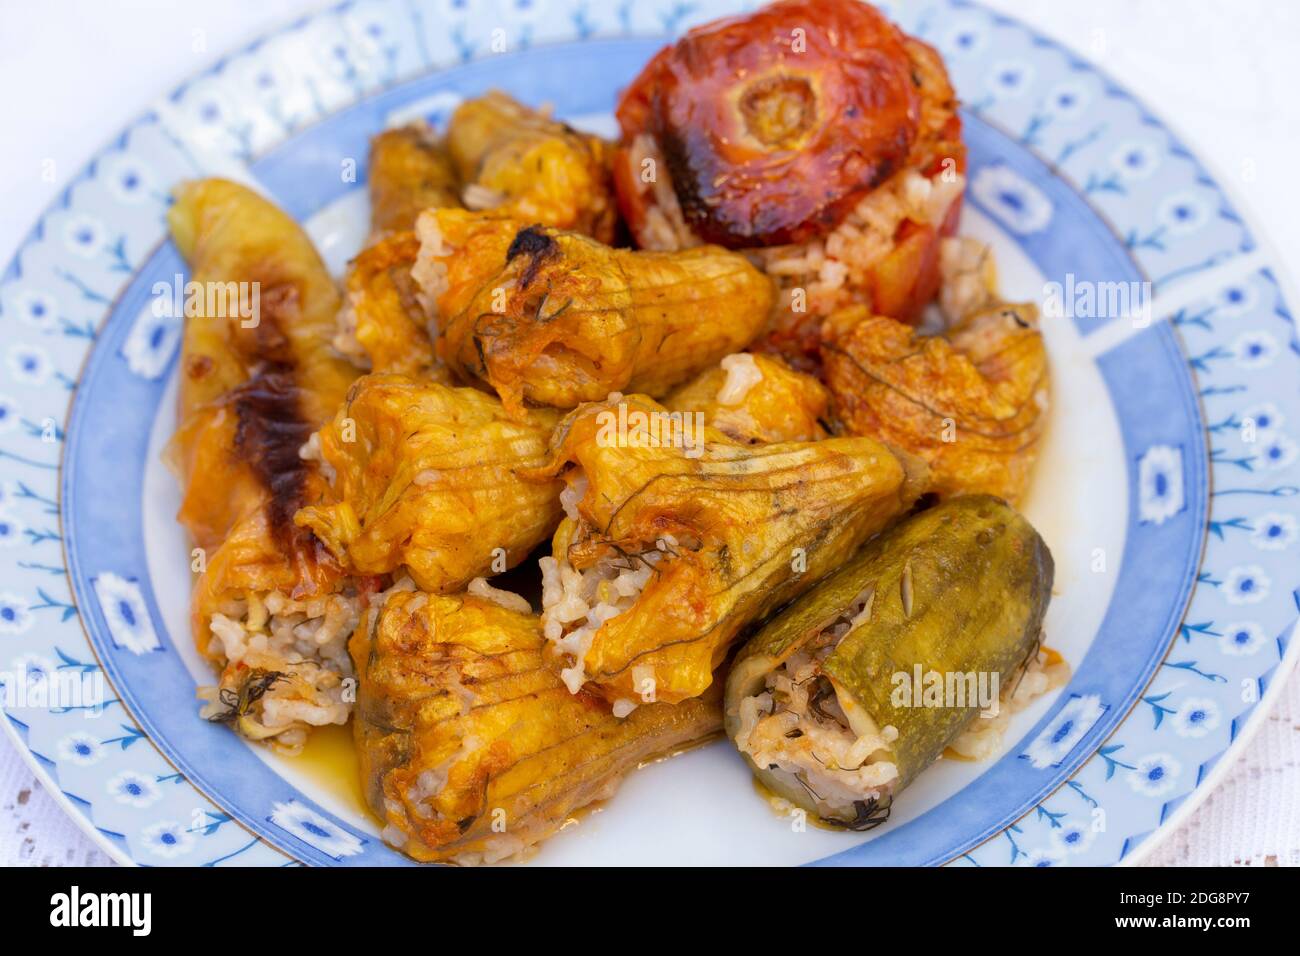 Vegetables, including courgette flowers stuffed with rice and herbs and baked  in olive oil Stock Photo